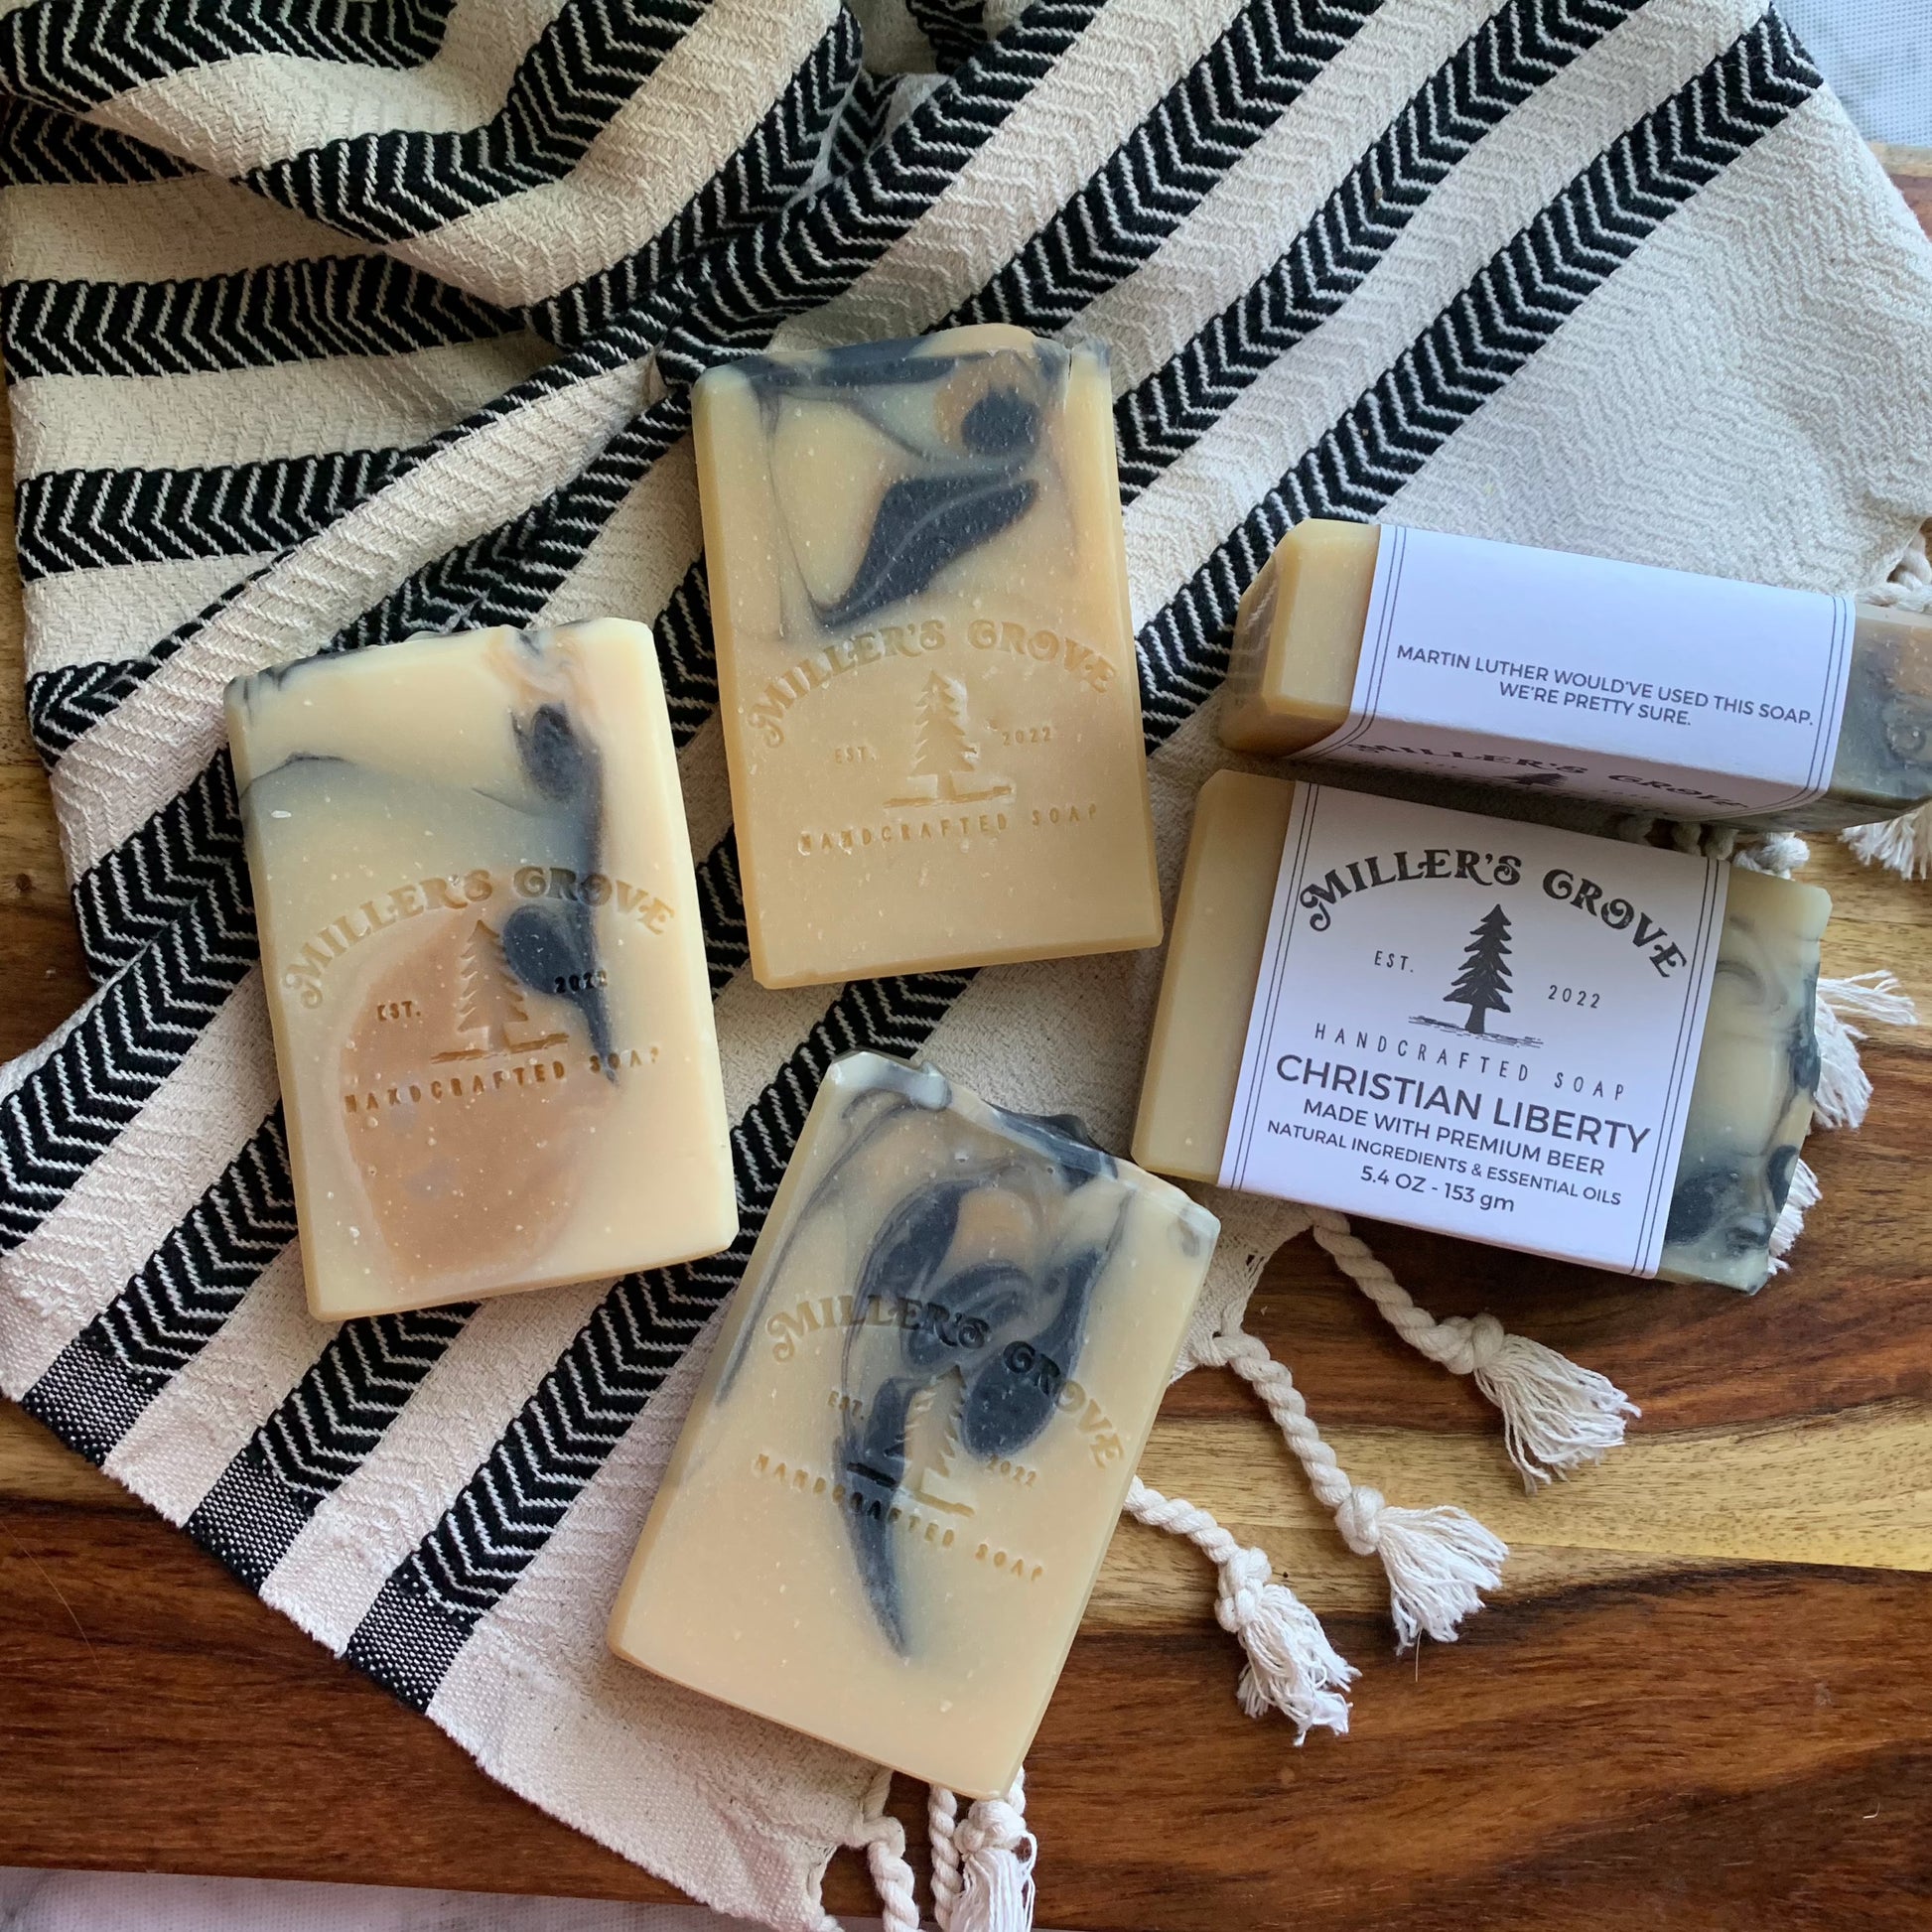 You want more soap scents? – Good Shepherd Ministries